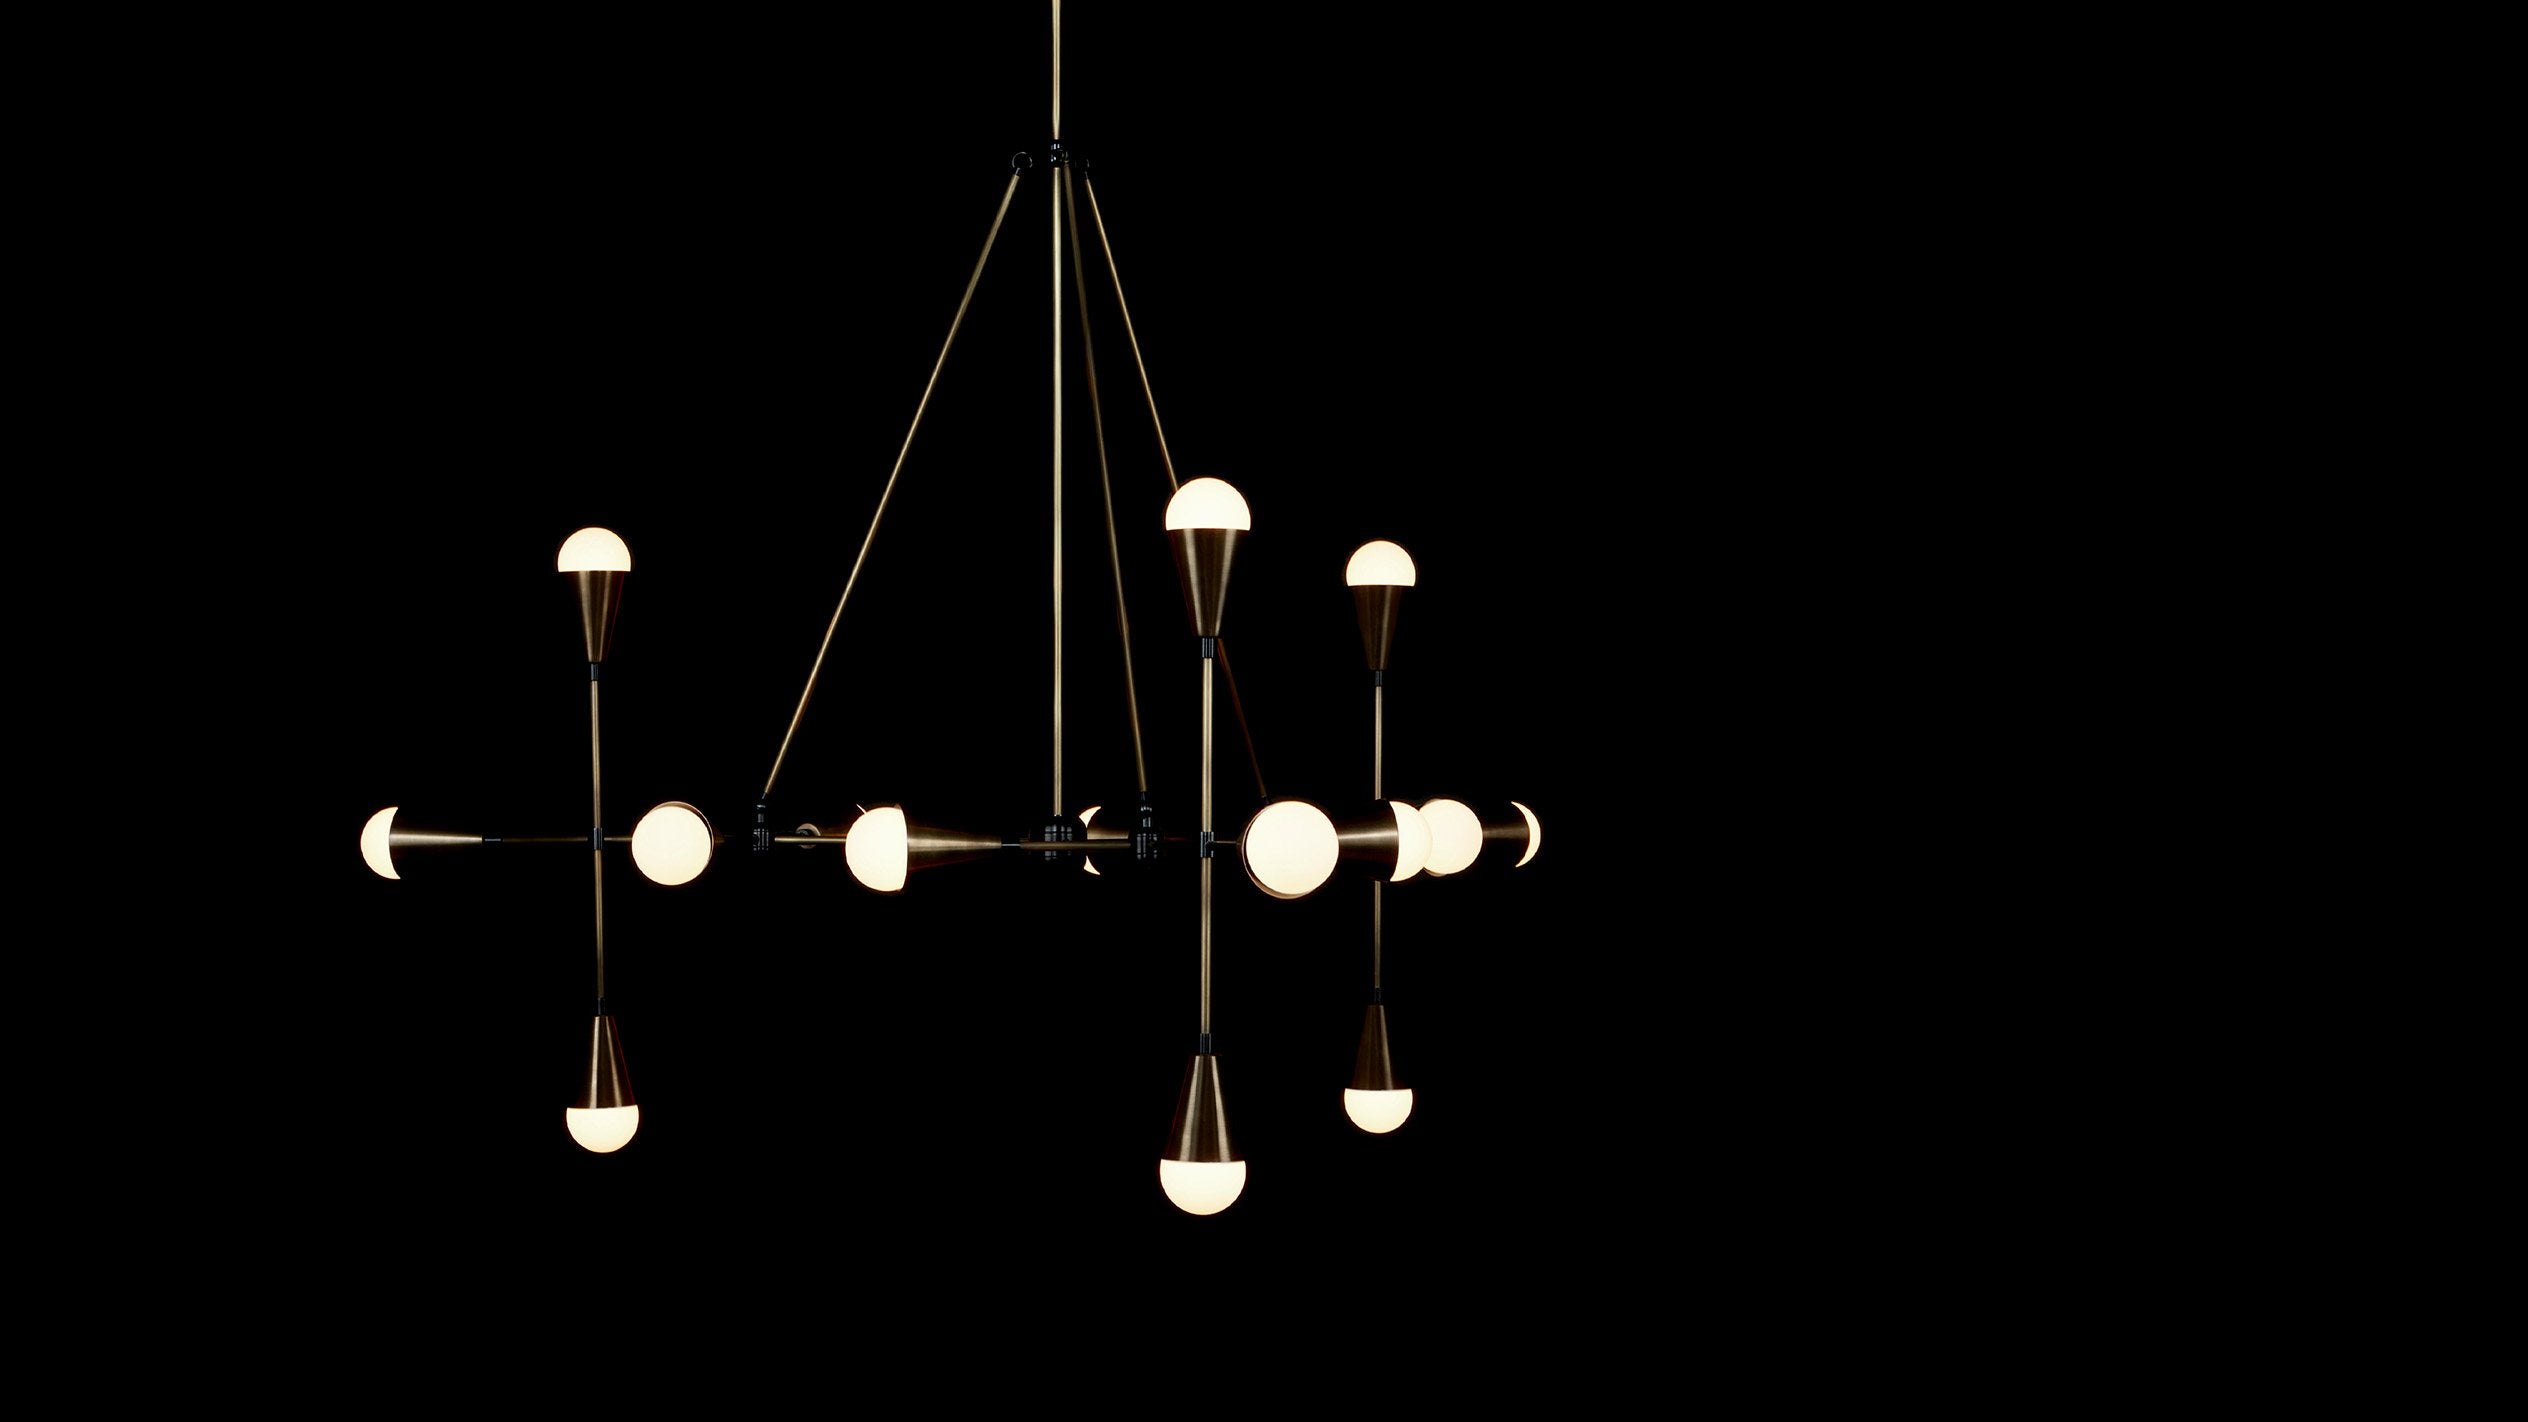 TRIAD : 15 ceiling pendant in Aged Brass and Blackened Brass finish, hanging against a black background. 